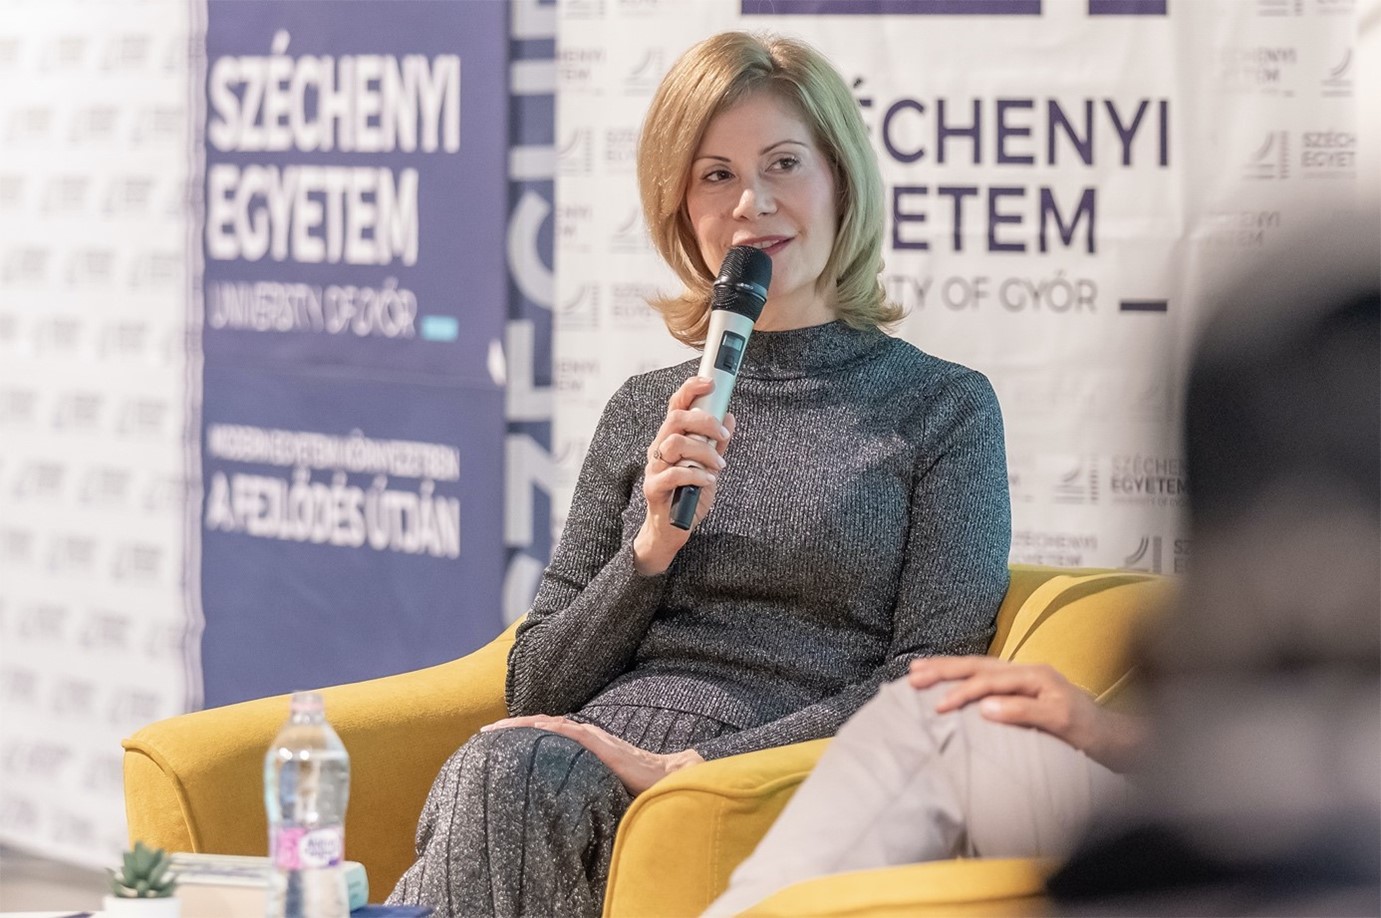 The moderator and interviewer of the discussion was Dr Eszter Lukács, Vice President for International Affairs and Strategic Relations at Széchenyi István University. 